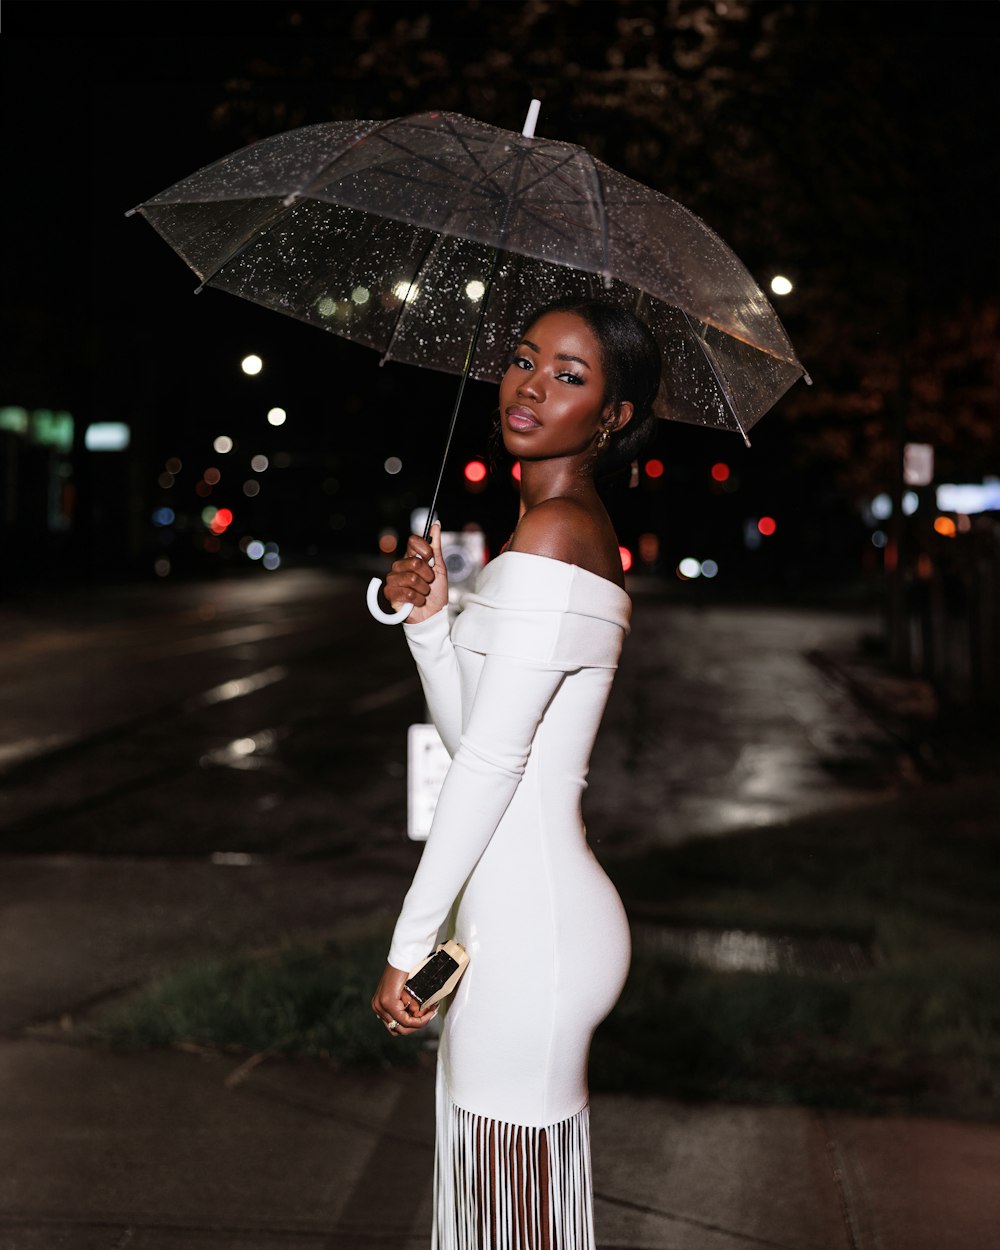 a woman in a white dress holding an umbrella